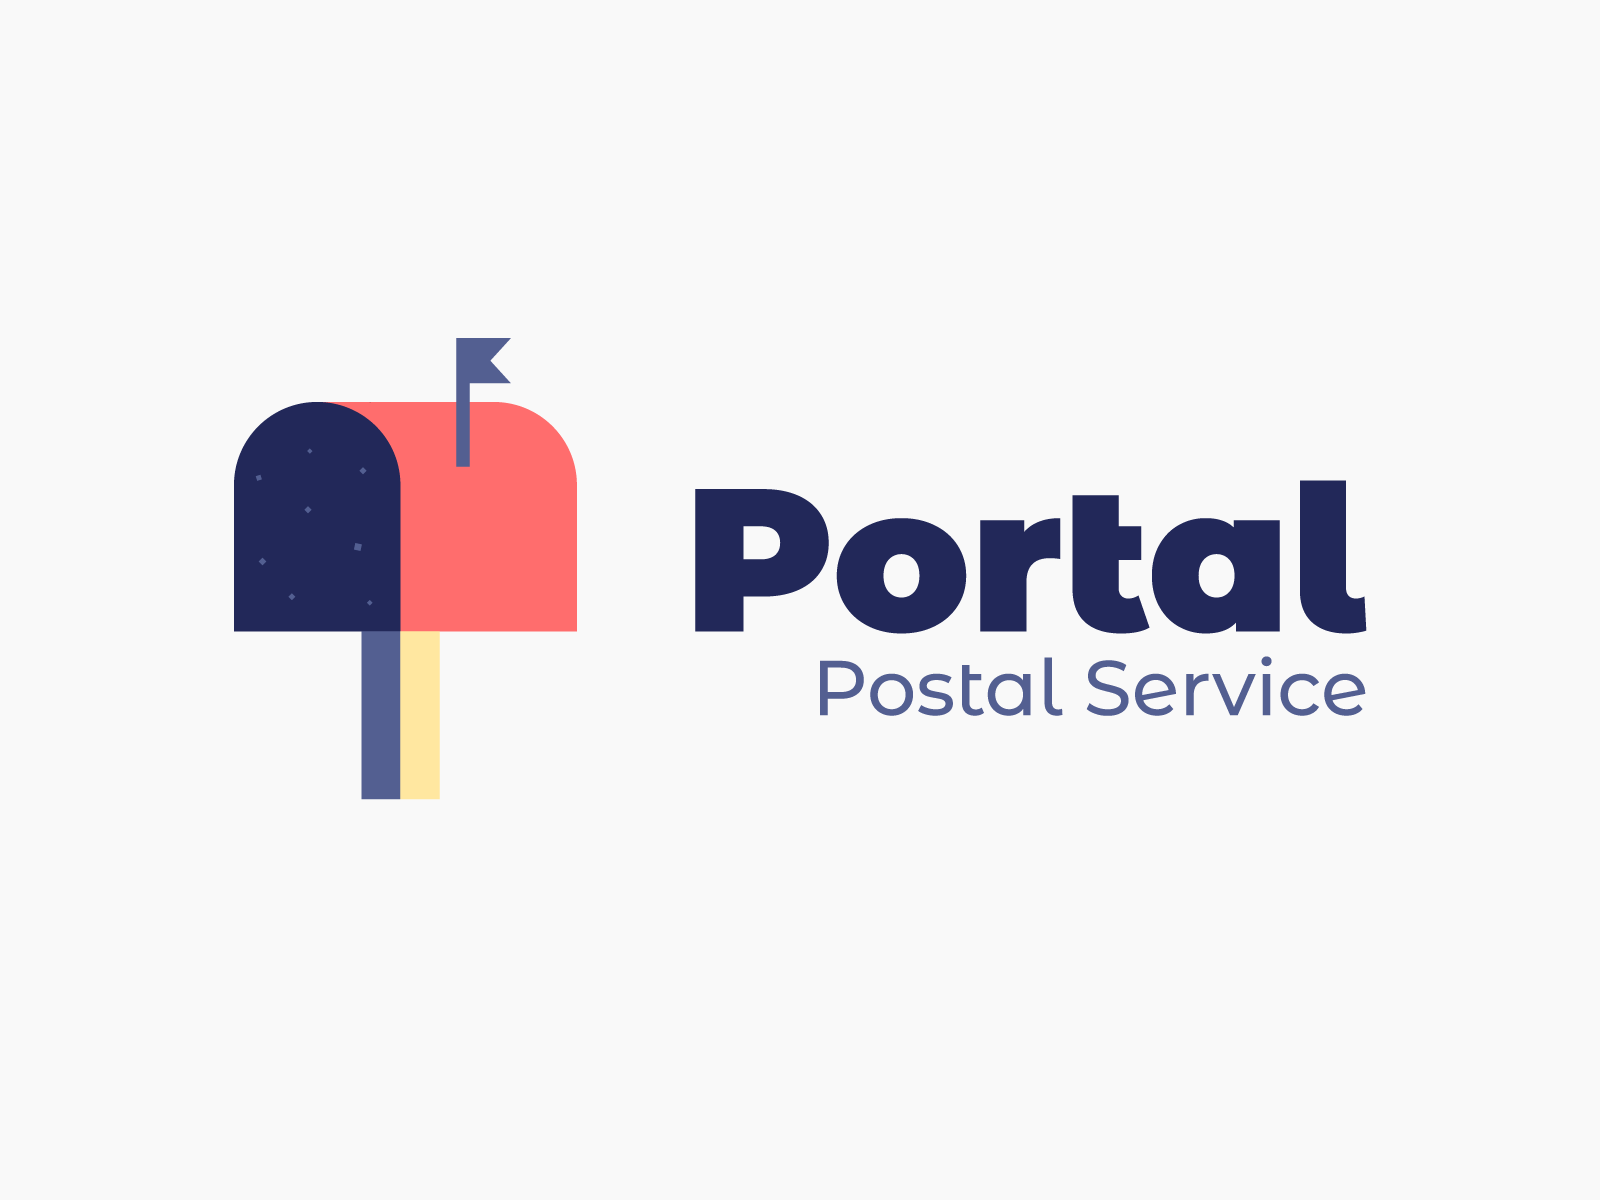 Postal service logos from around the world! (Pt. 1) : r/coolguides